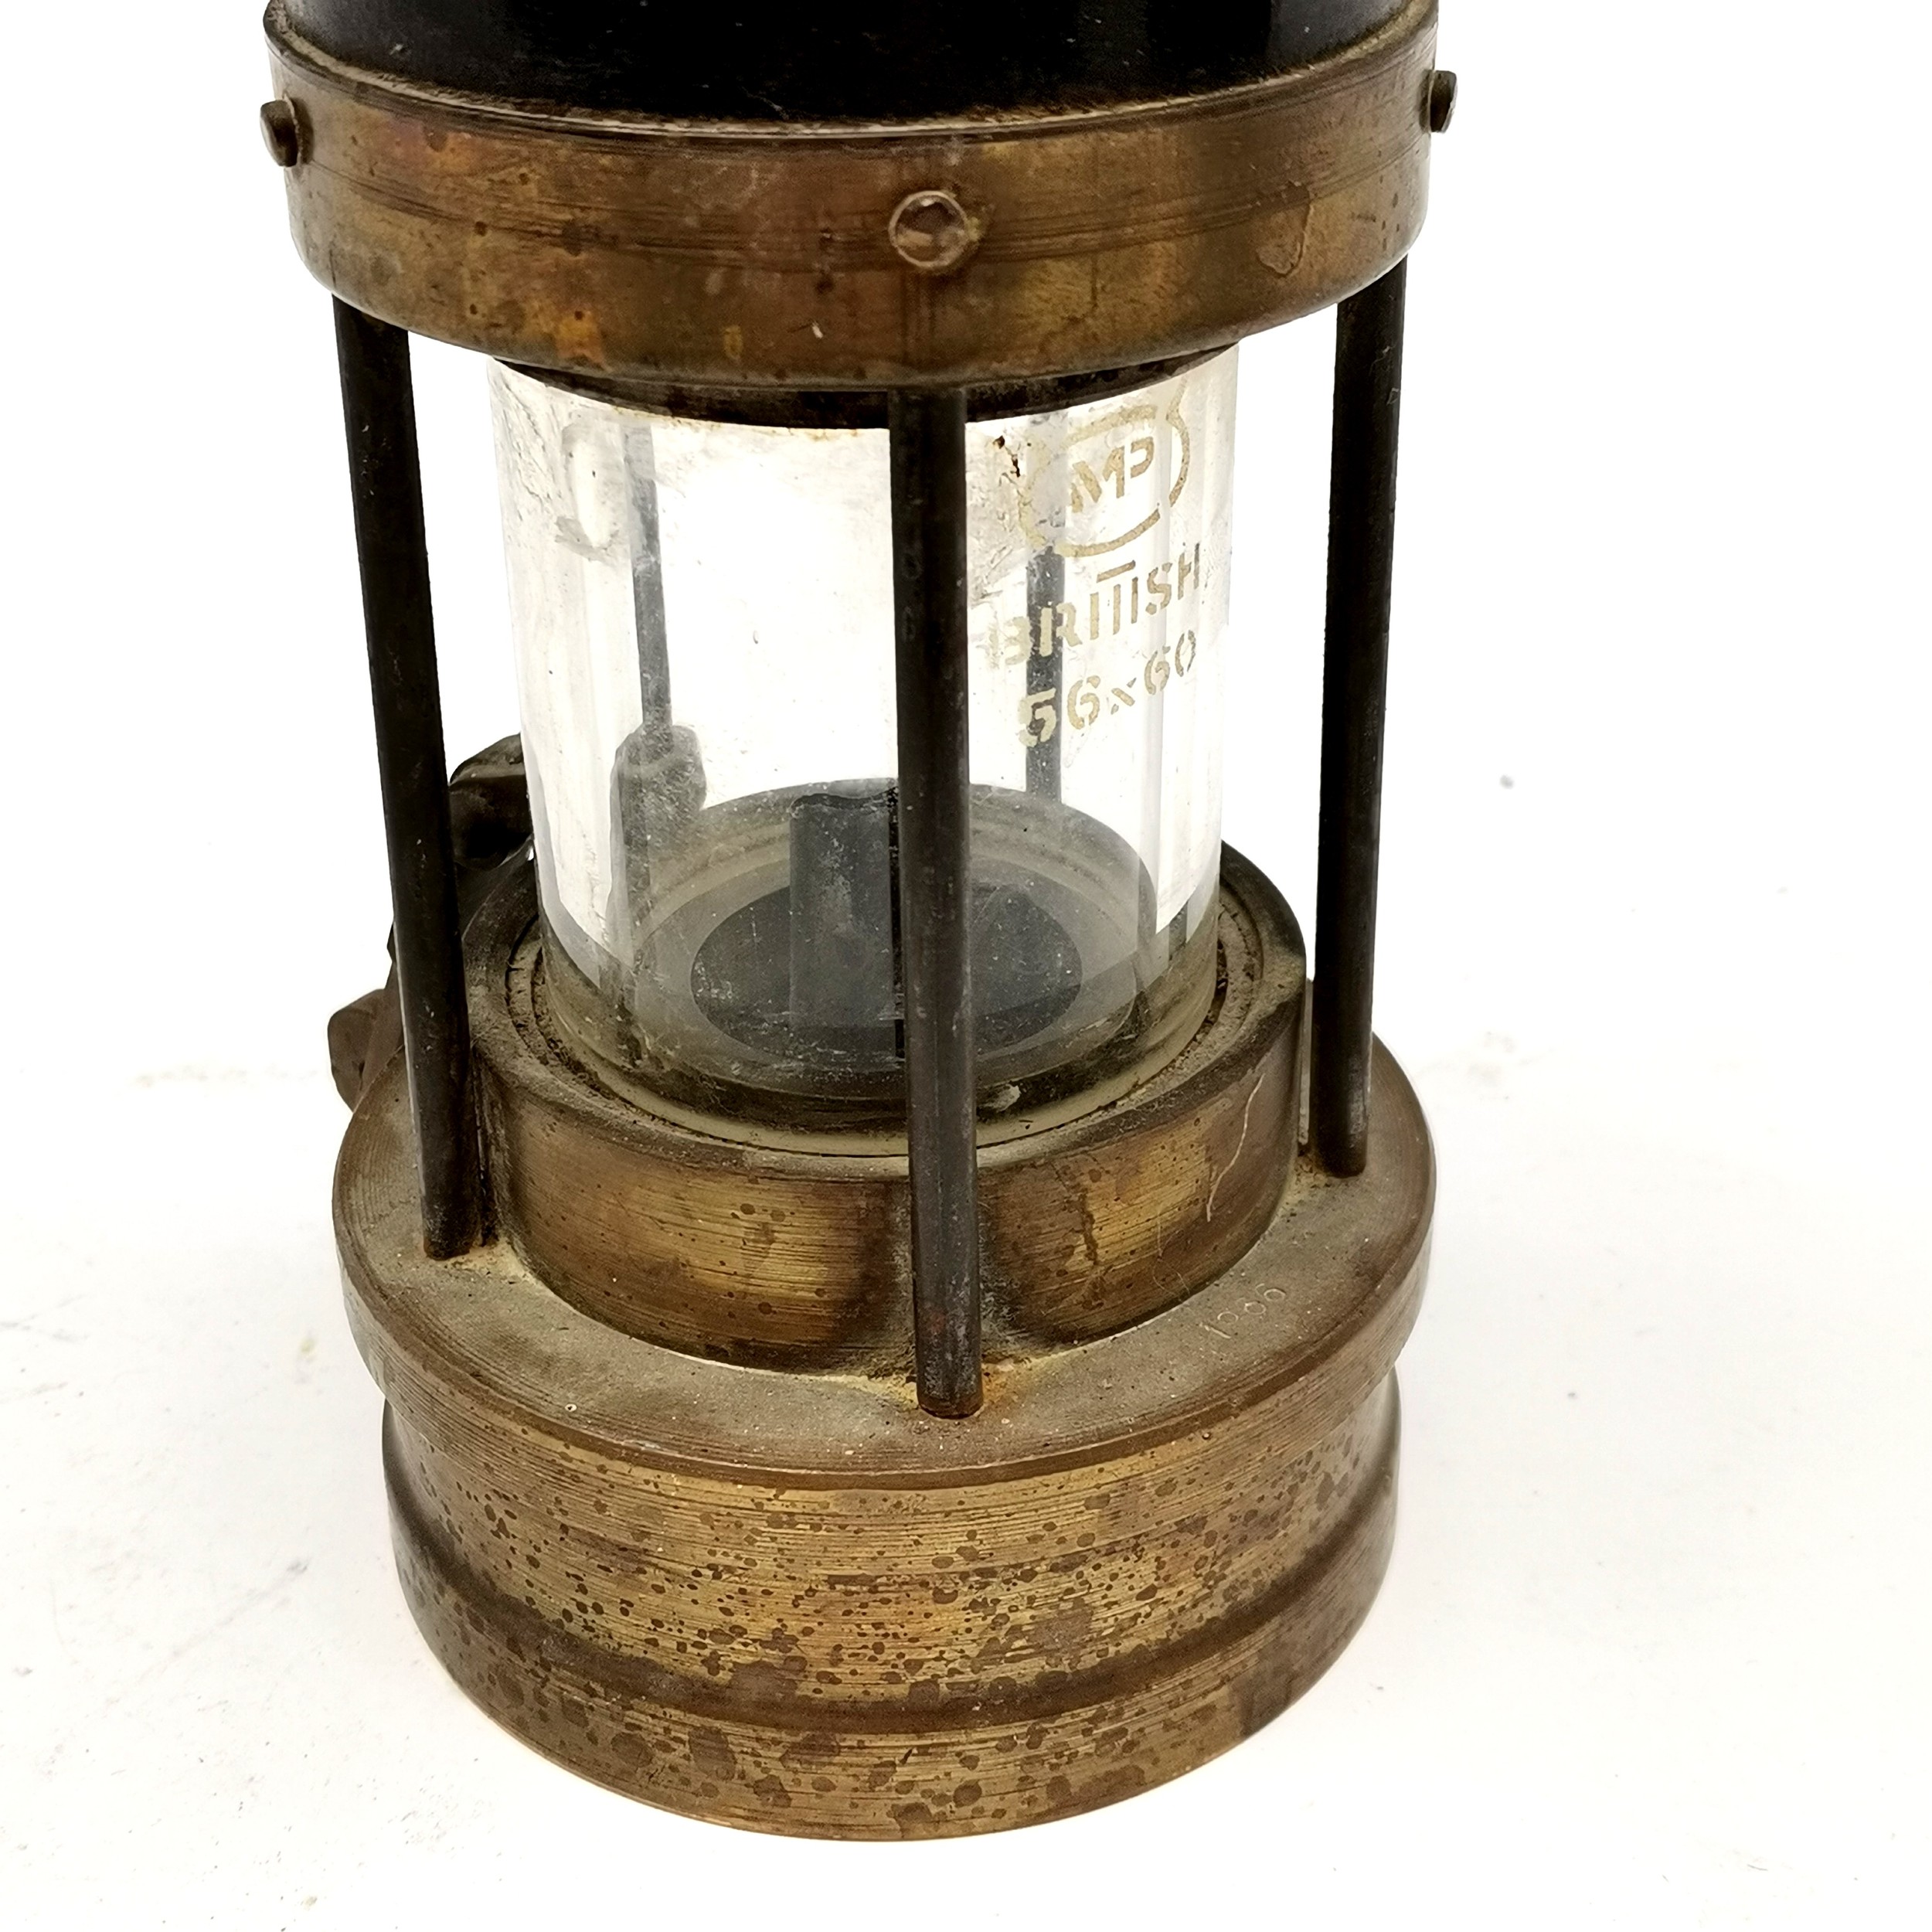 Vintage E Thomas & Williams (Aberdare) GPO miners lamp in brass & steel - 25cm high with no - Image 4 of 4